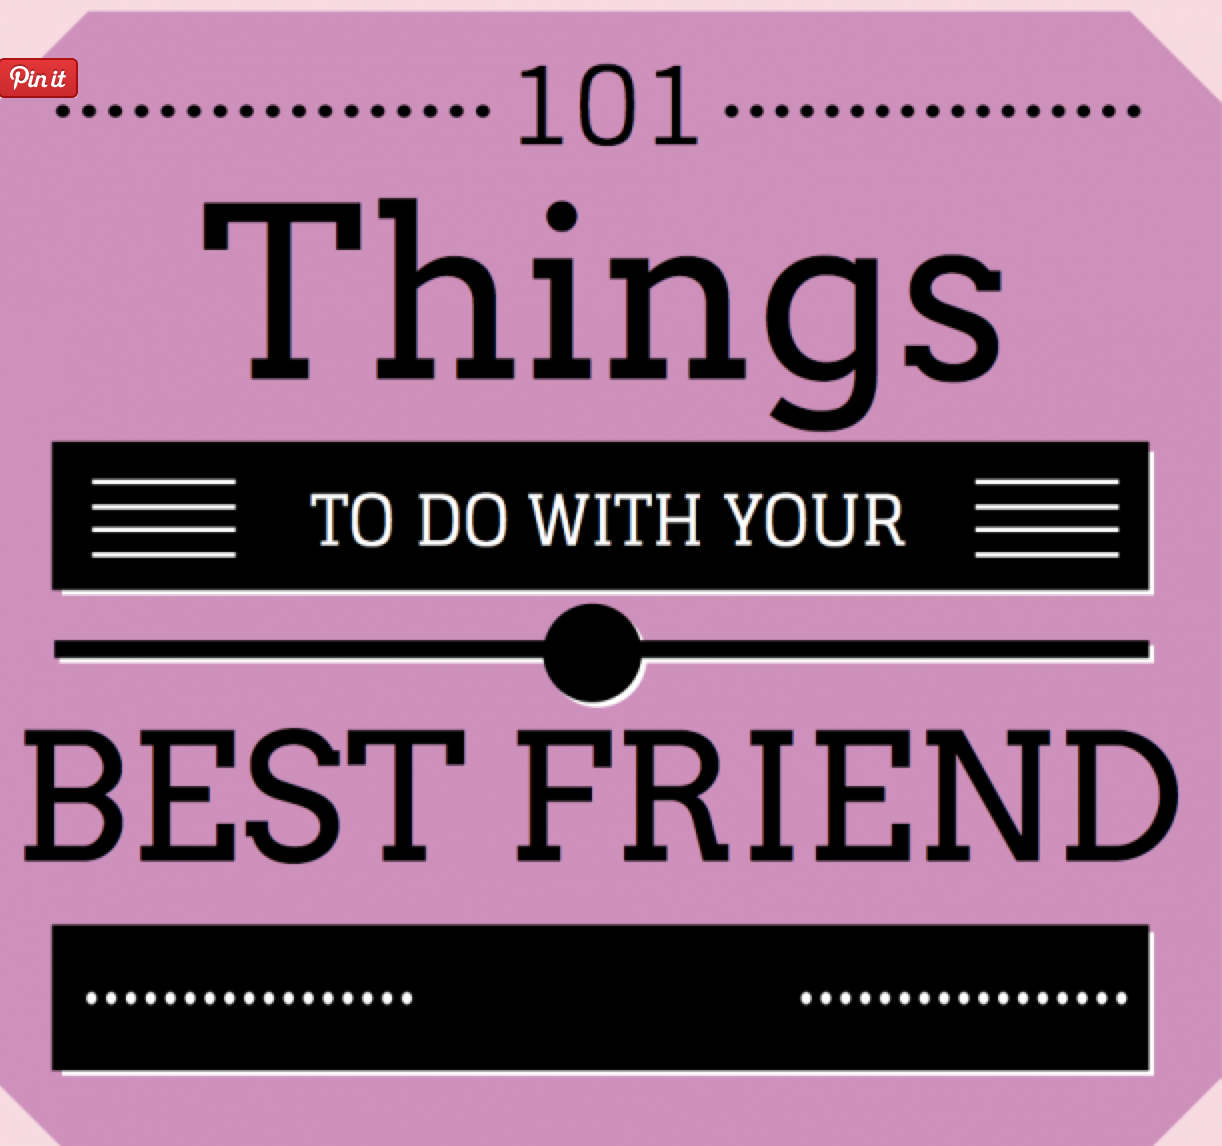 12 Fun Things to Do with Friends Online